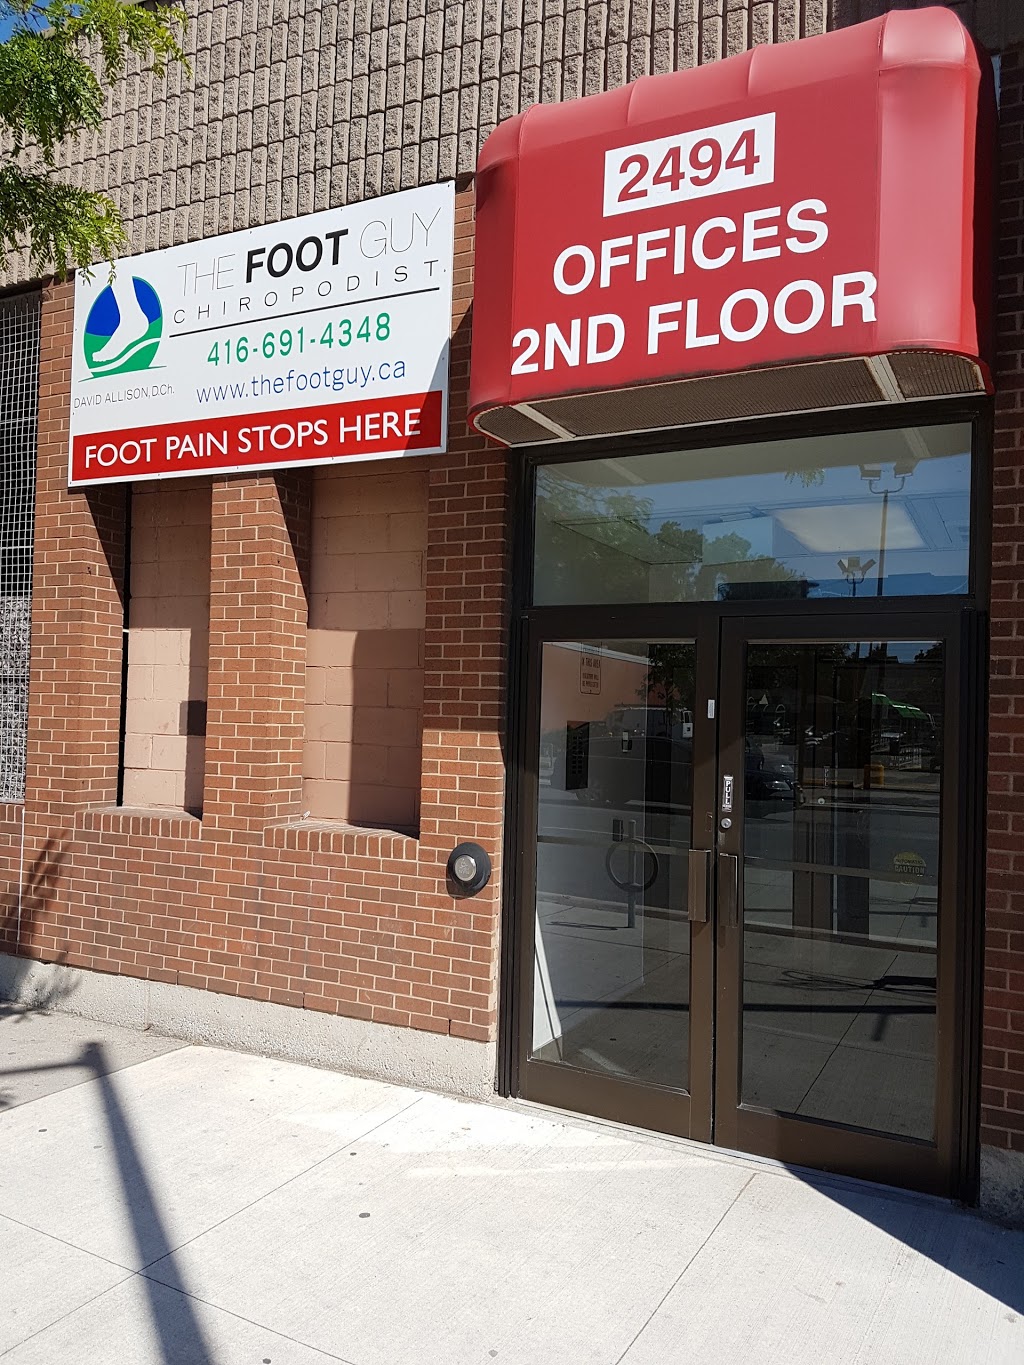 The Foot Guy | doctor | 952 Kingston Rd, Toronto, ON M4E 1S7, Canada | 4166914348 OR +1 416-691-4348